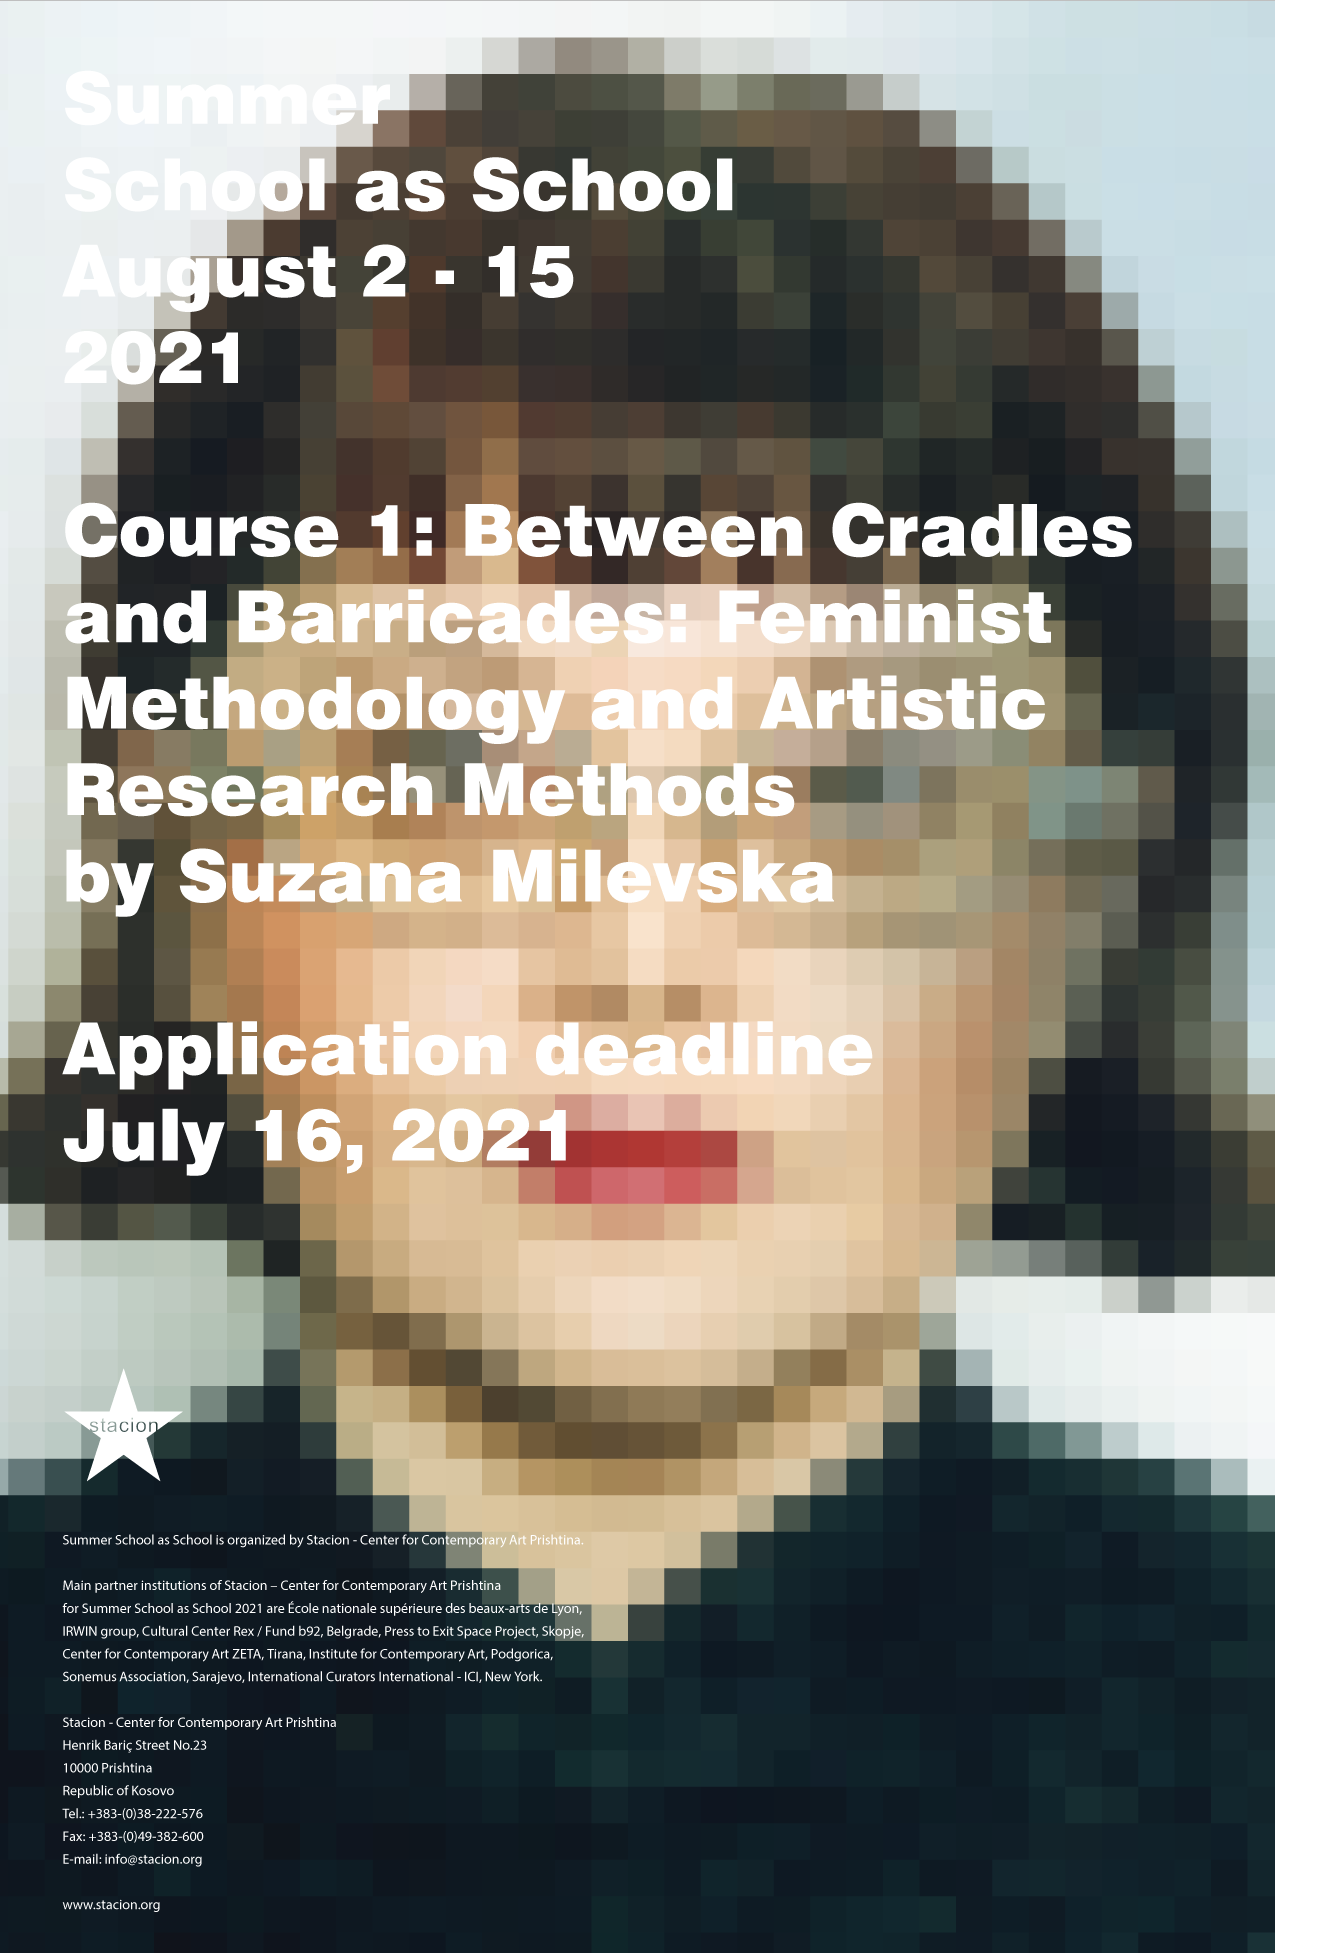 Course 1: Between Cradles and Barricades: Feminist Methodology and Artistic Research Methods